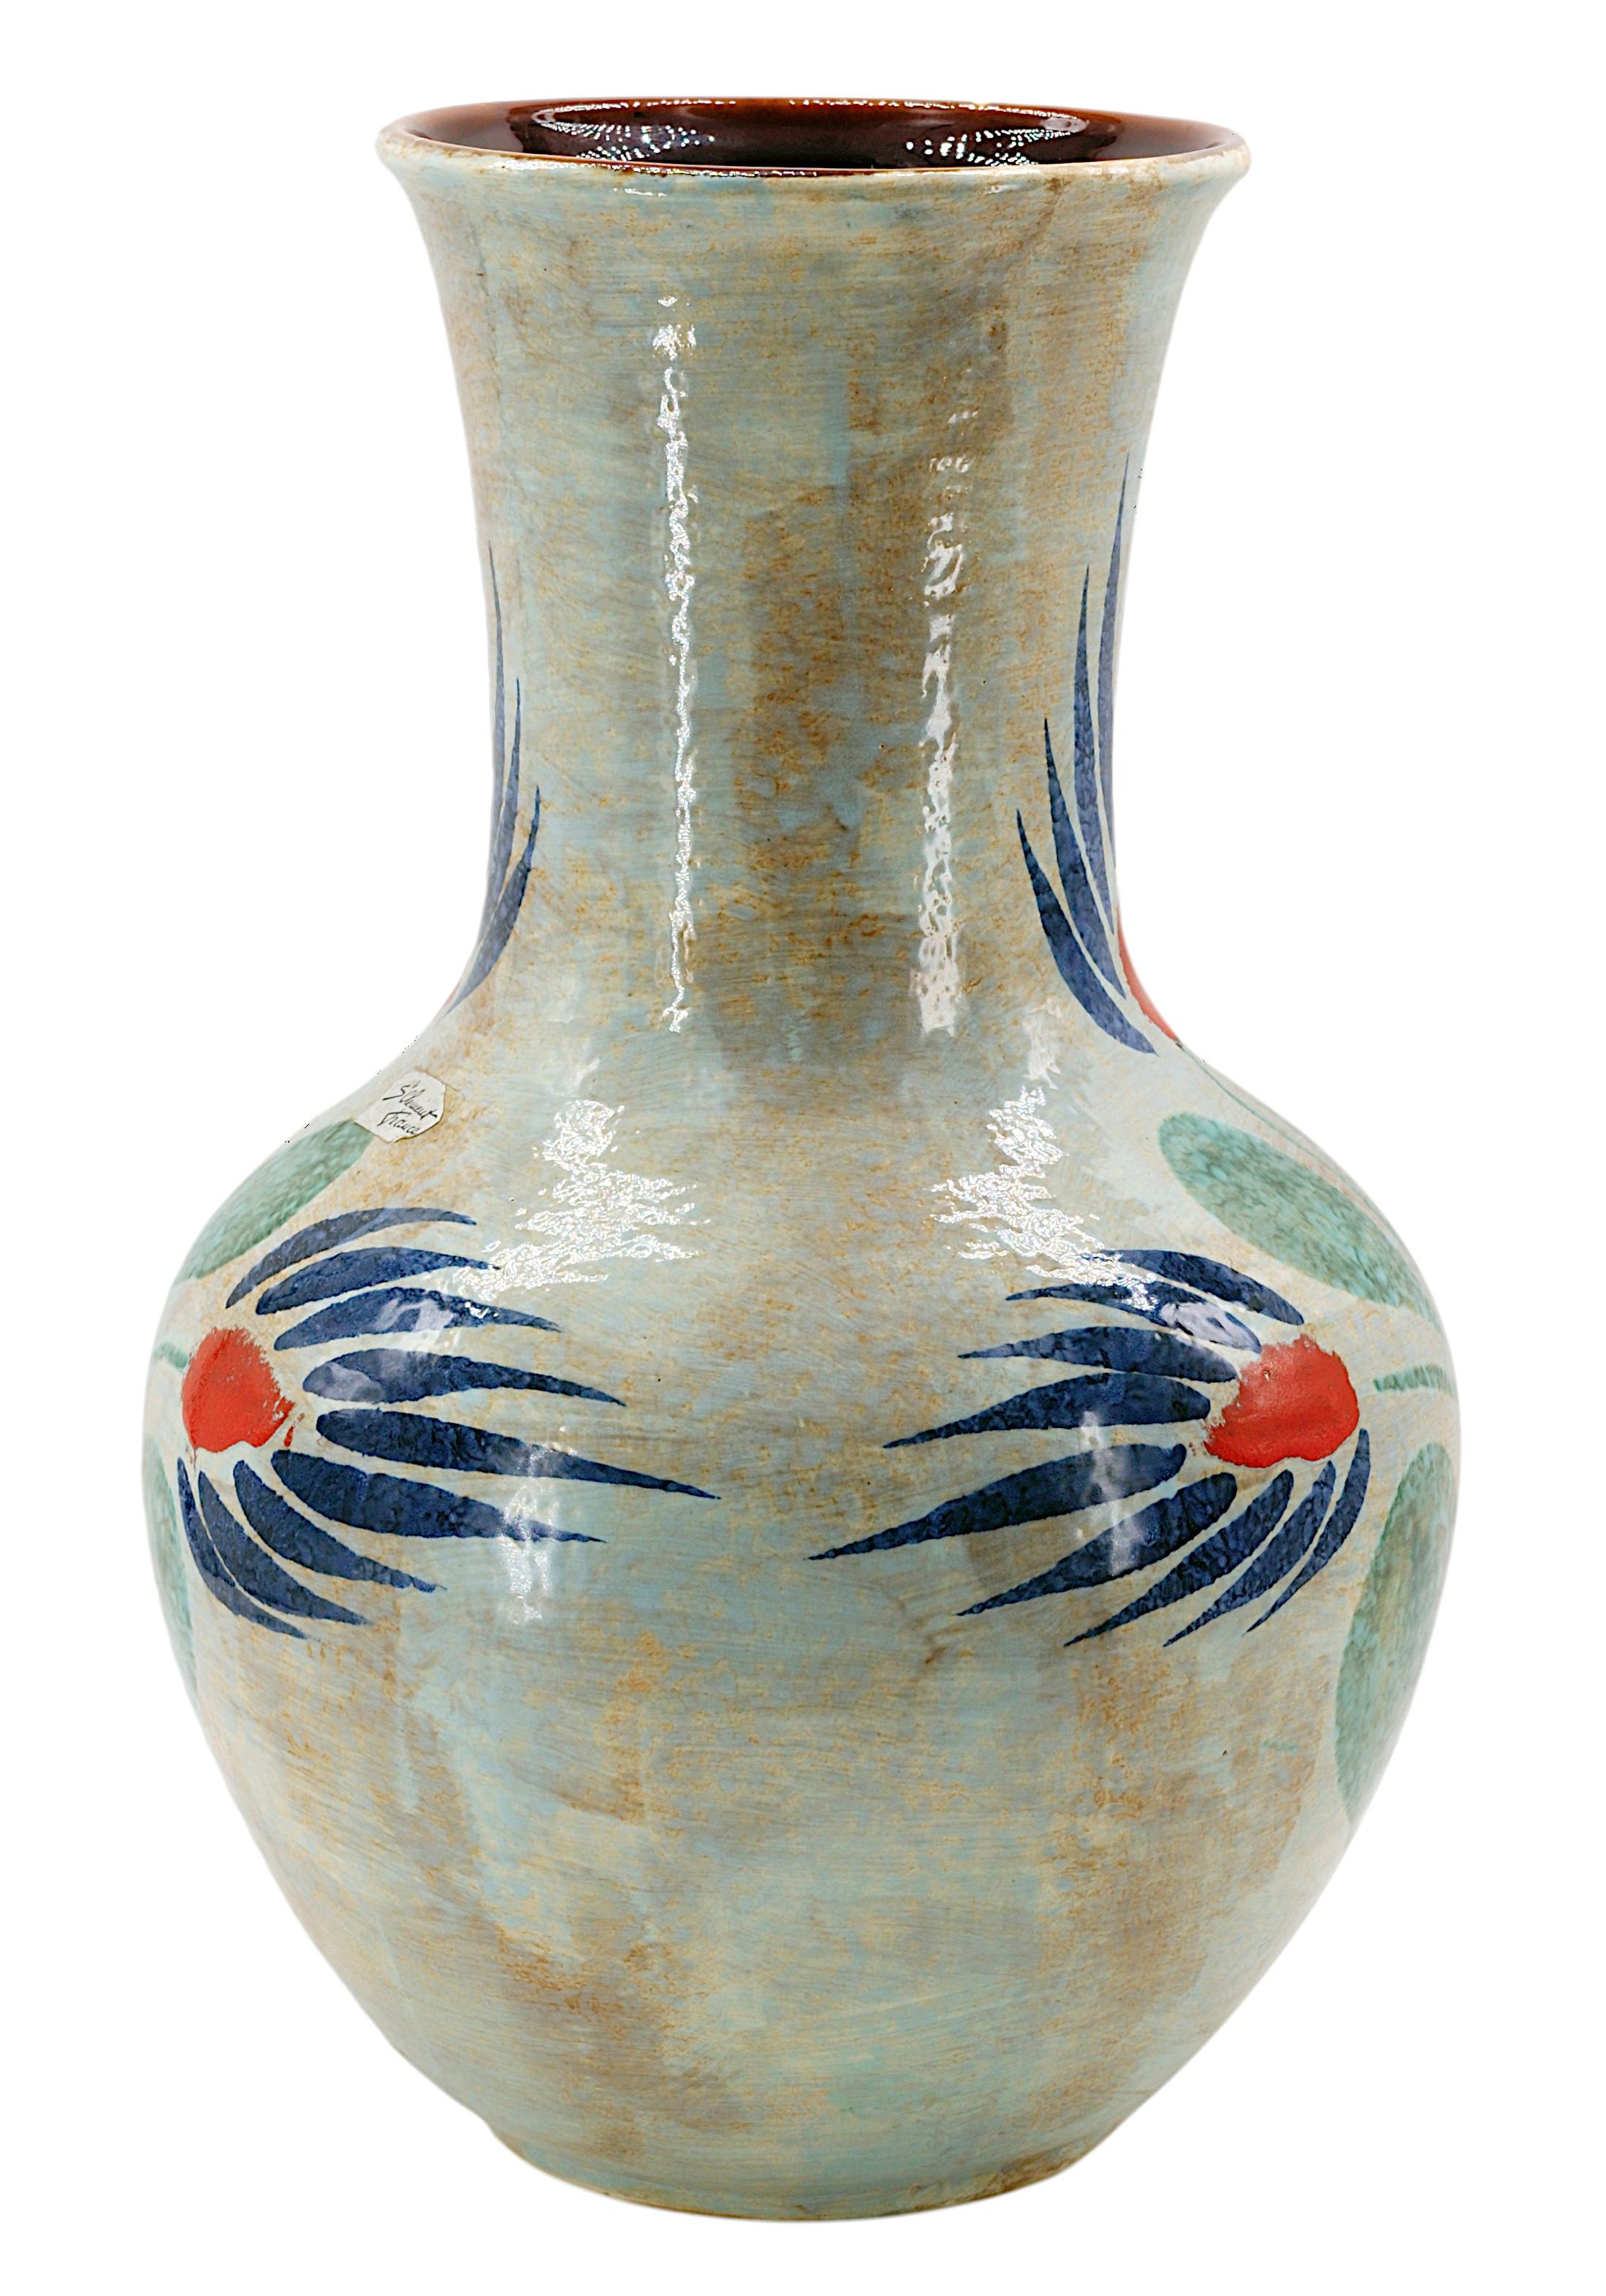 Saint-Clement Huge French Mid-Century Stoneware Vase, 1950s For Sale 1